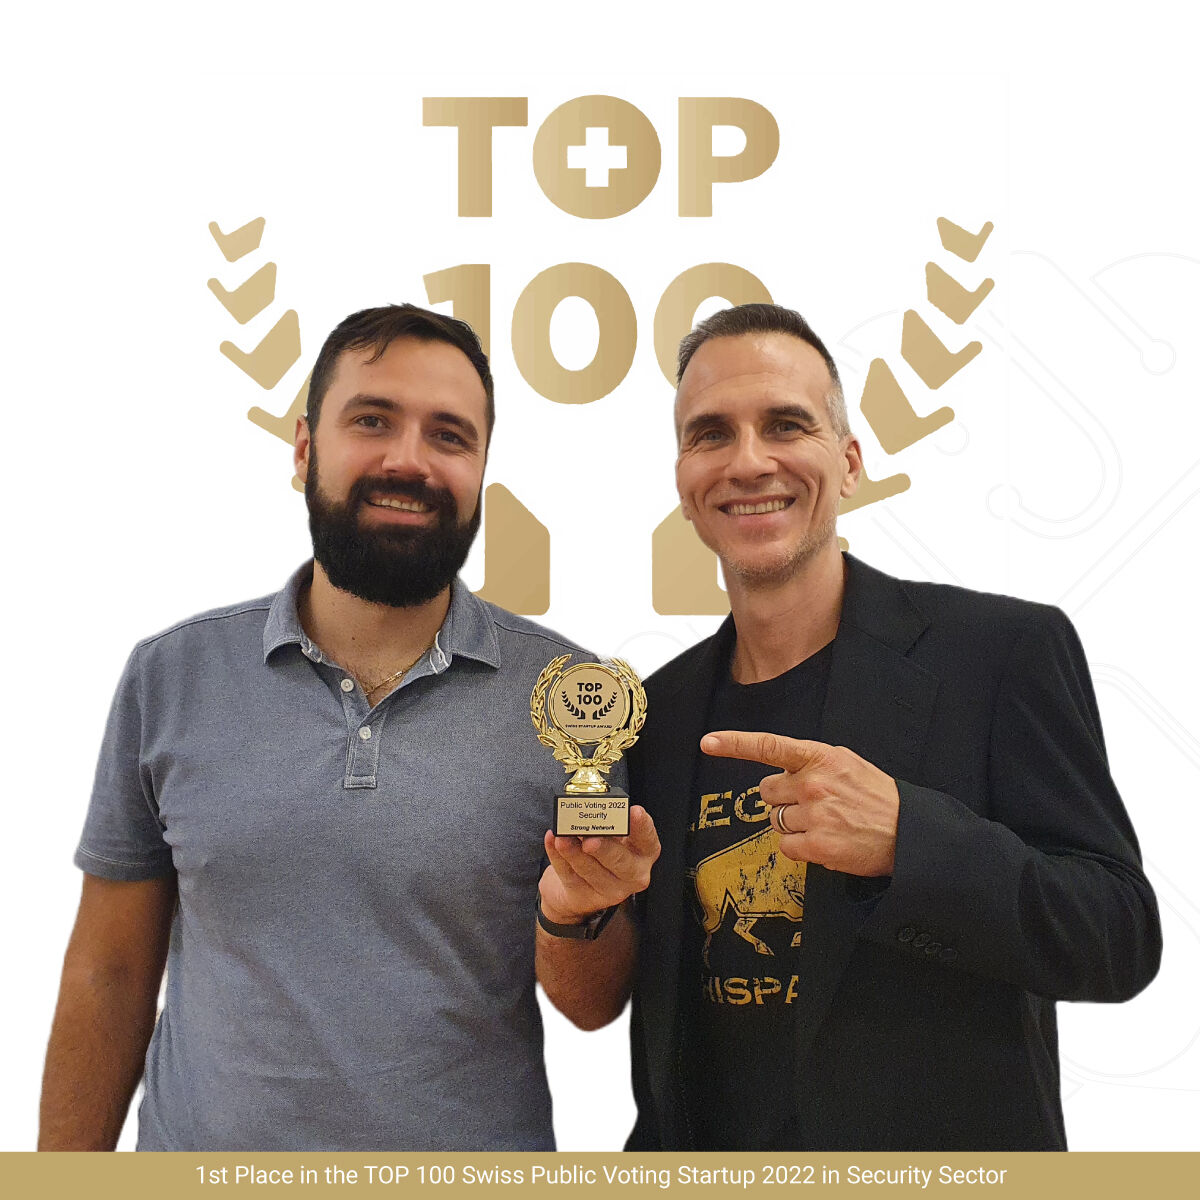 Remember last year, we ranked number 1 among #Swiss startups in the #security category! Thanks to all of you who voted for us 🏆 We're thrilled to be recognized among so many incredible startups. Good luck to all participants this year!

#TOP100SSU #StrongTeam #StrongNetwork